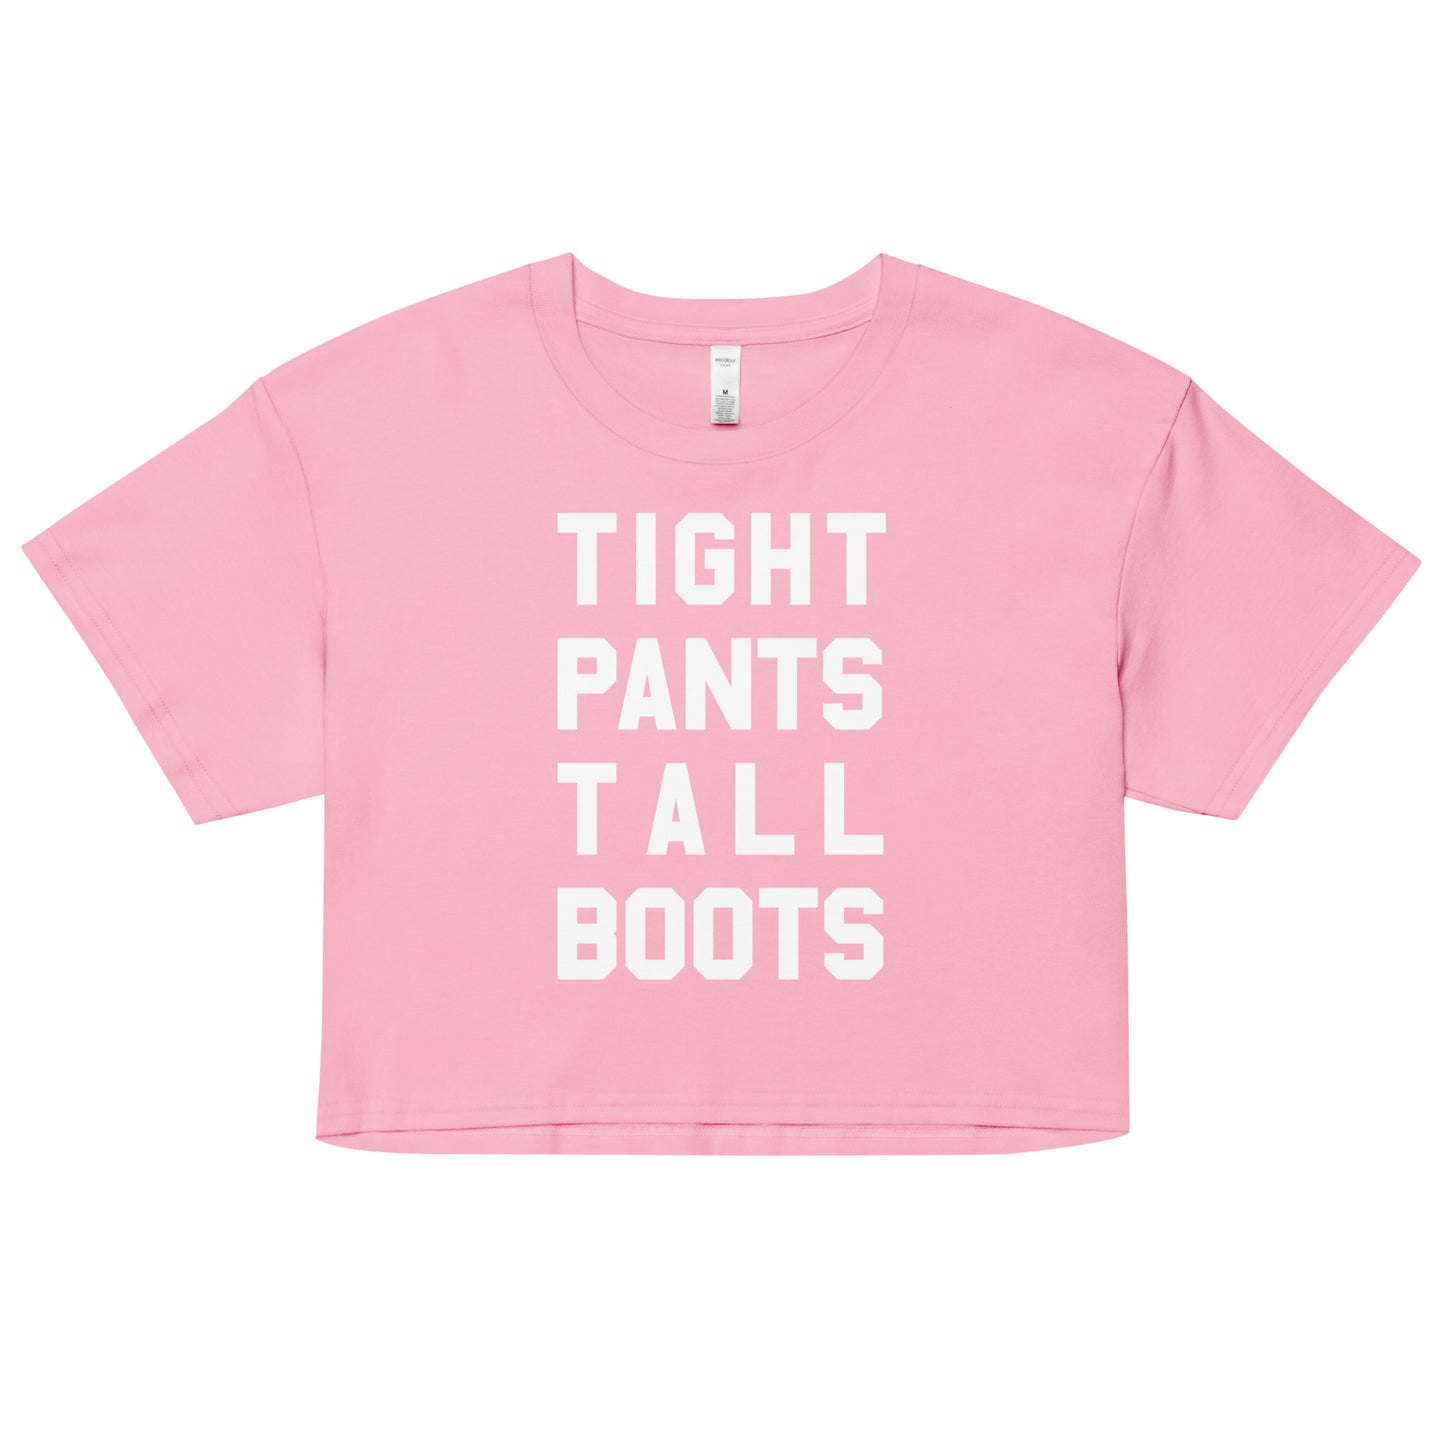 TIGHT PANTS TALL BOOTS UNISEX CROP